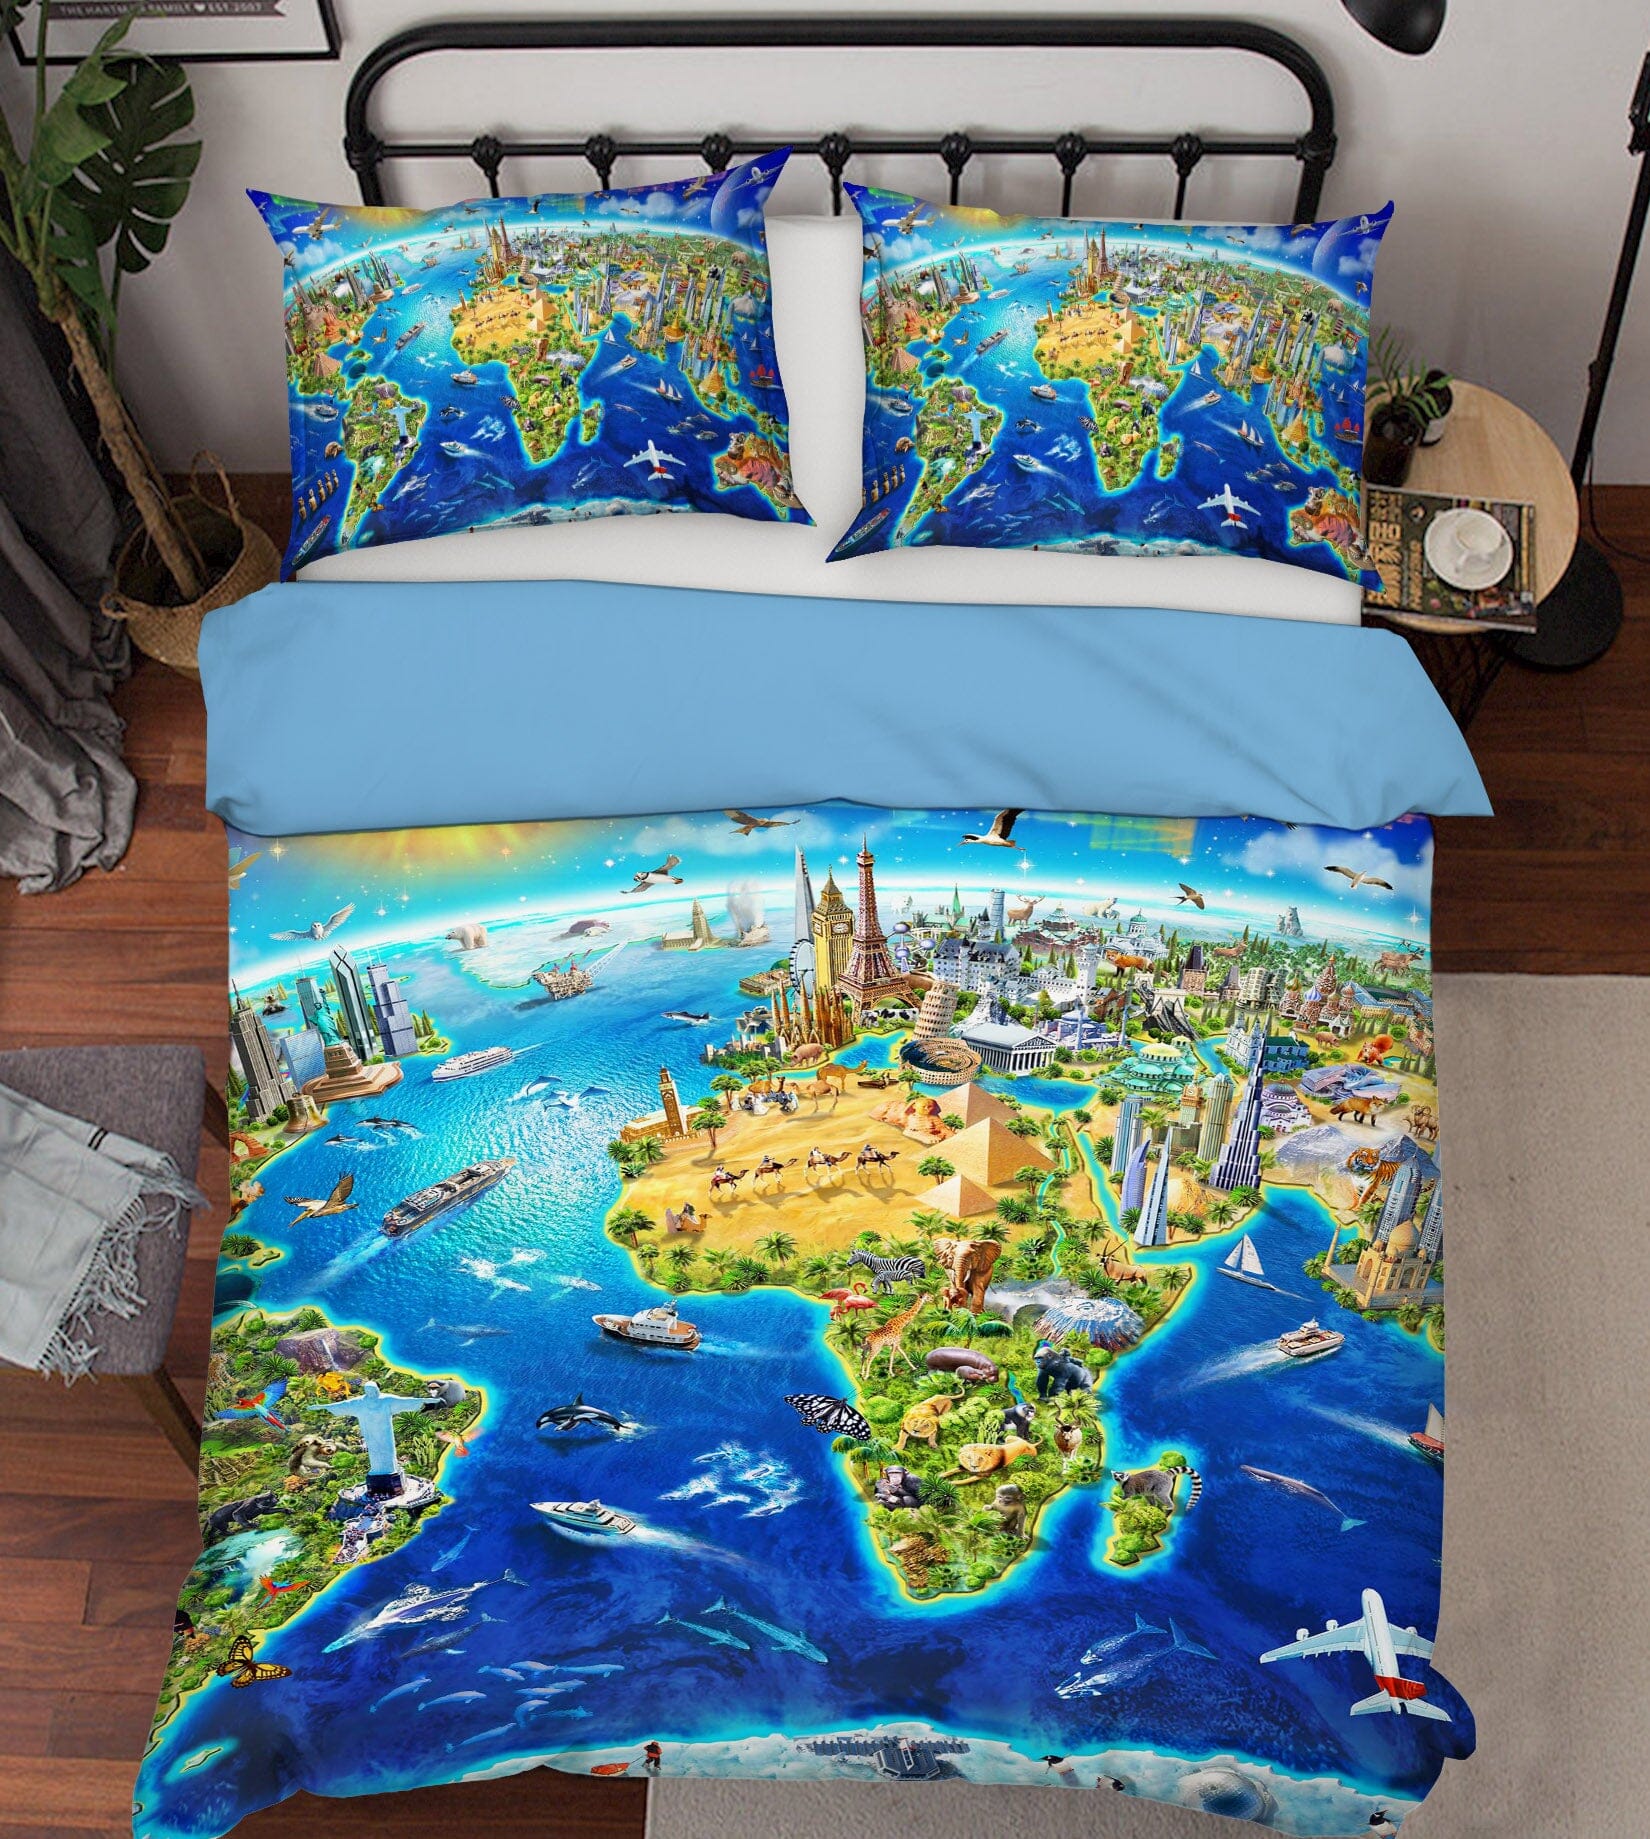 3D Earth Oasis 2126 Adrian Chesterman Bedding Bed Pillowcases Quilt Quiet Covers AJ Creativity Home 